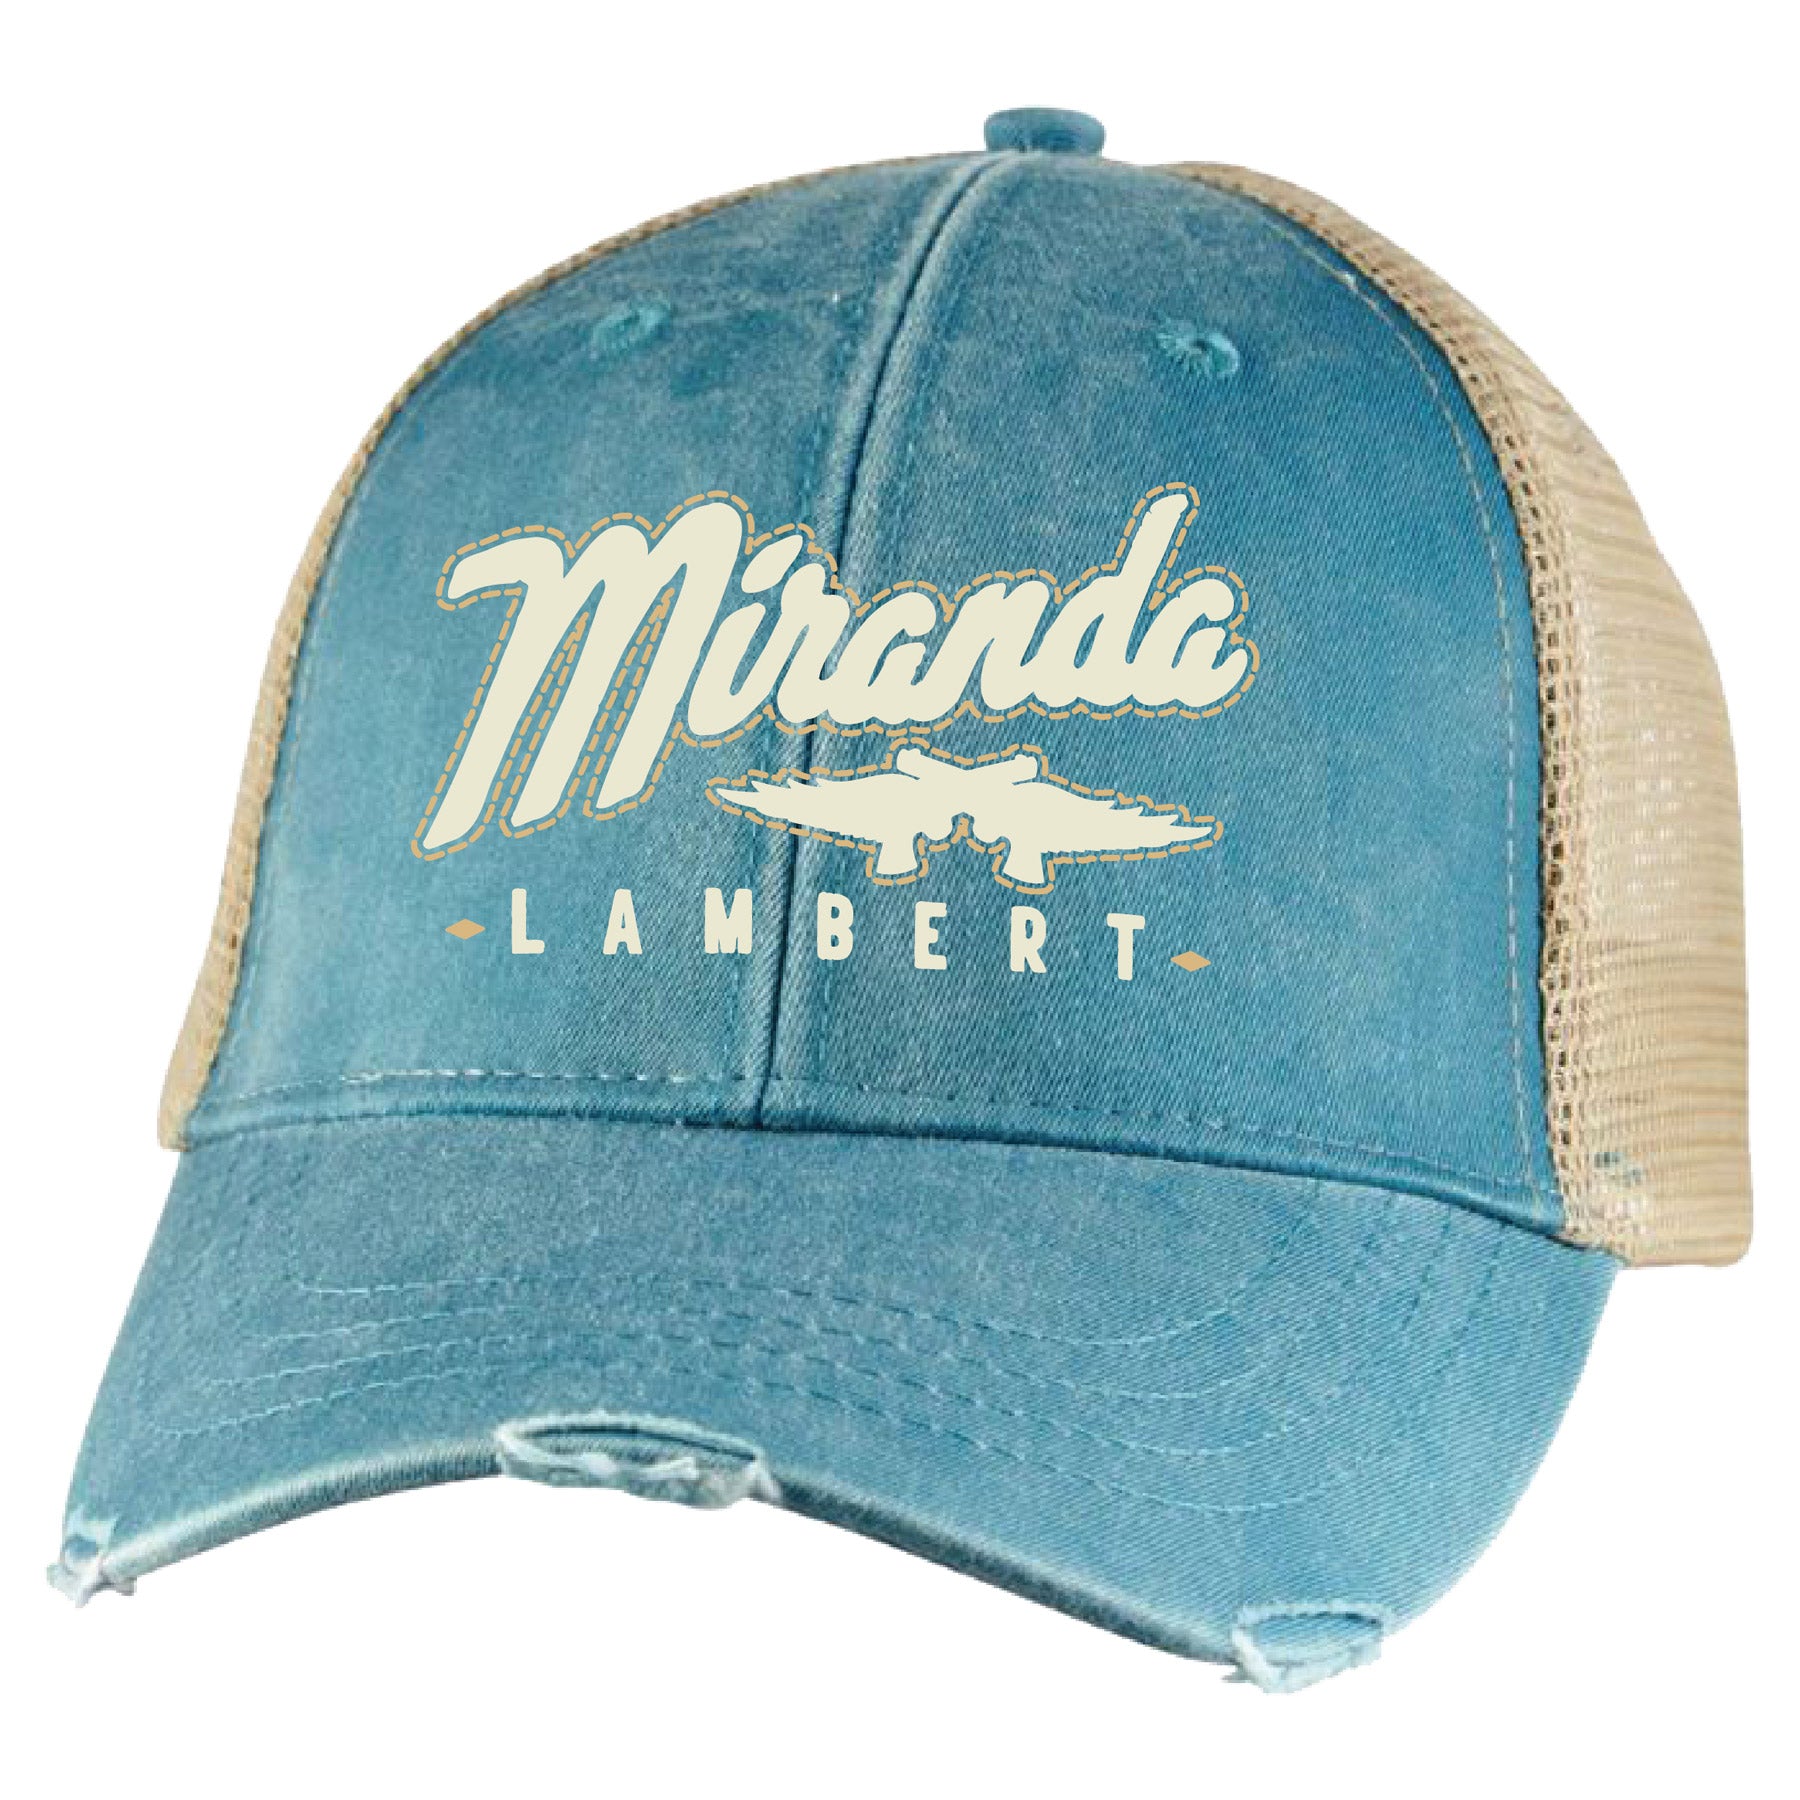 Front features the words "Miranda Lambert" with the guns and wings logo.